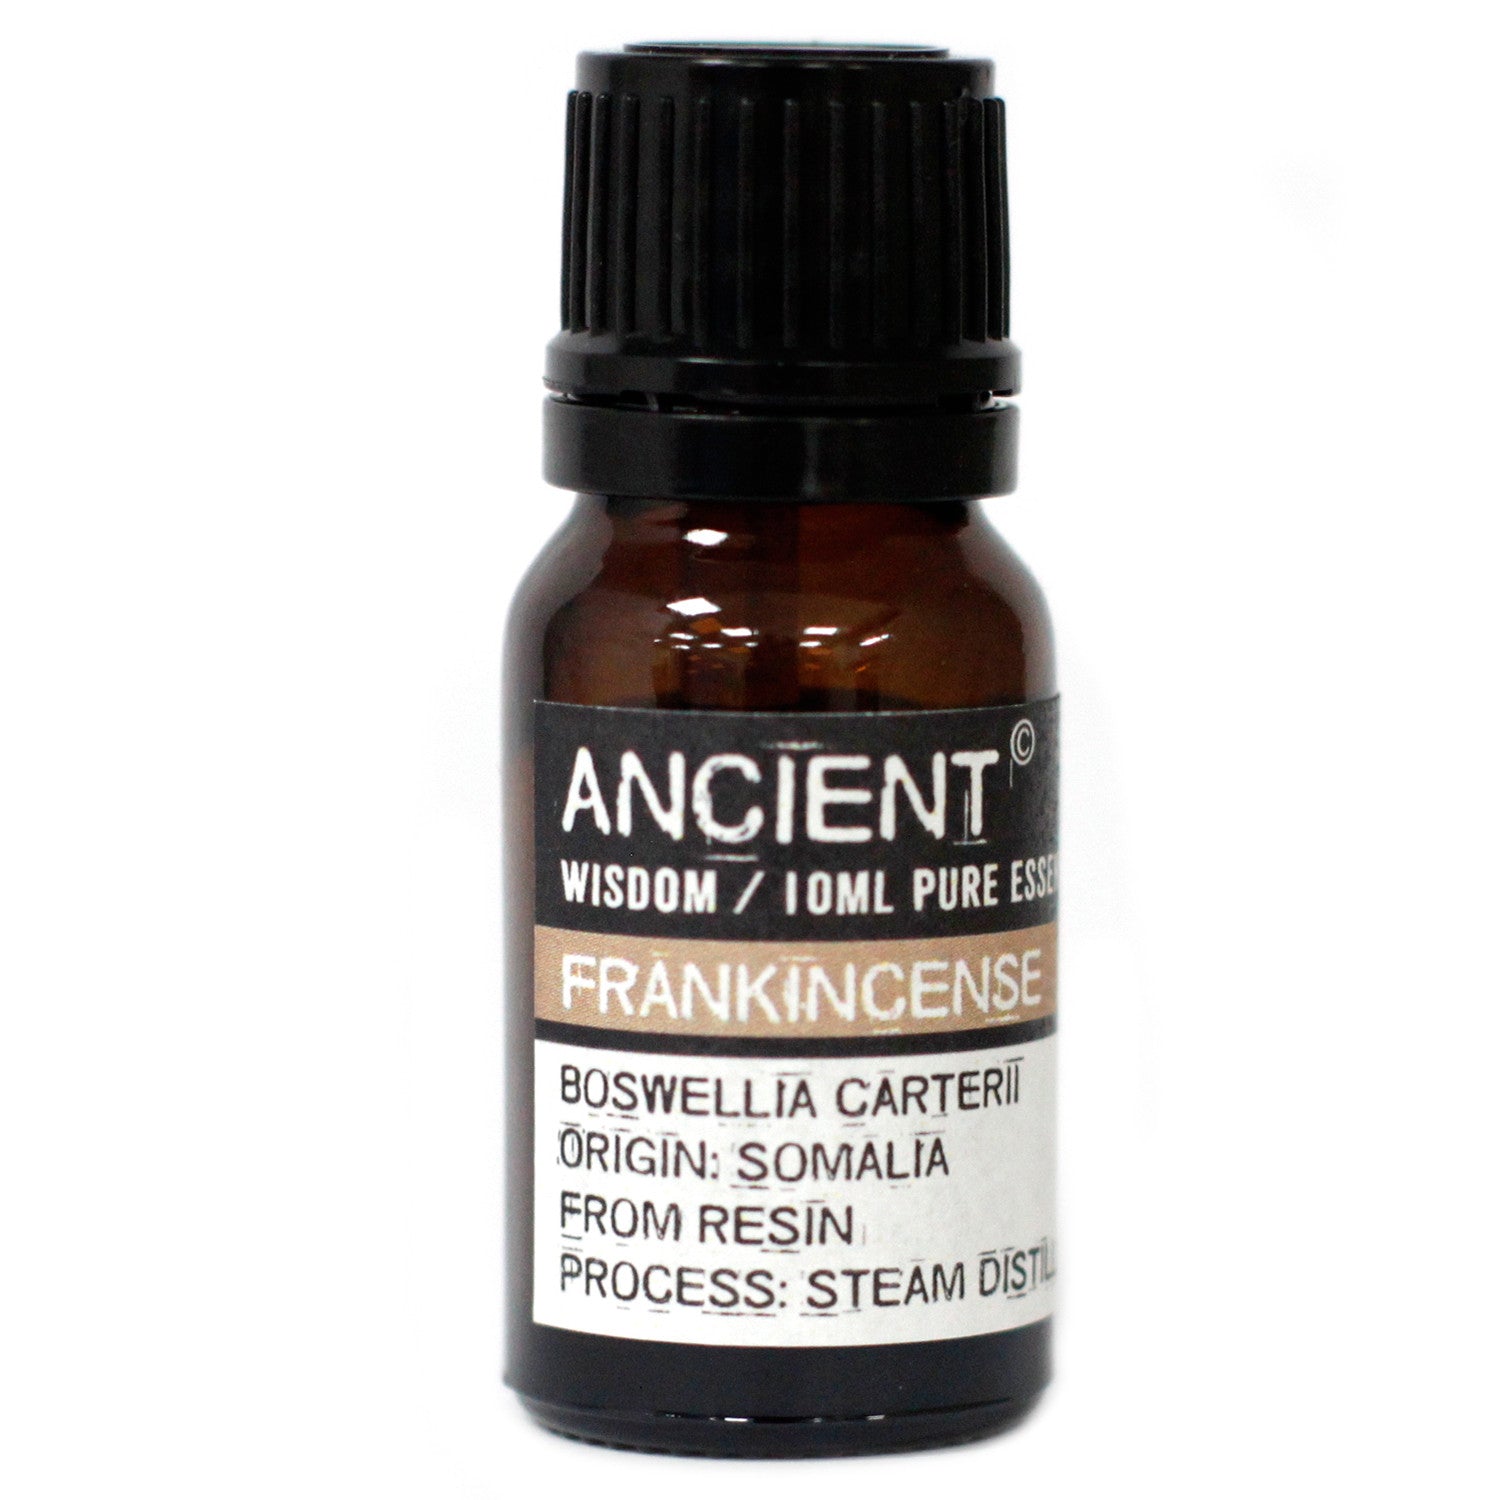 View 10 ml Frankincense Pure Essential Oil information